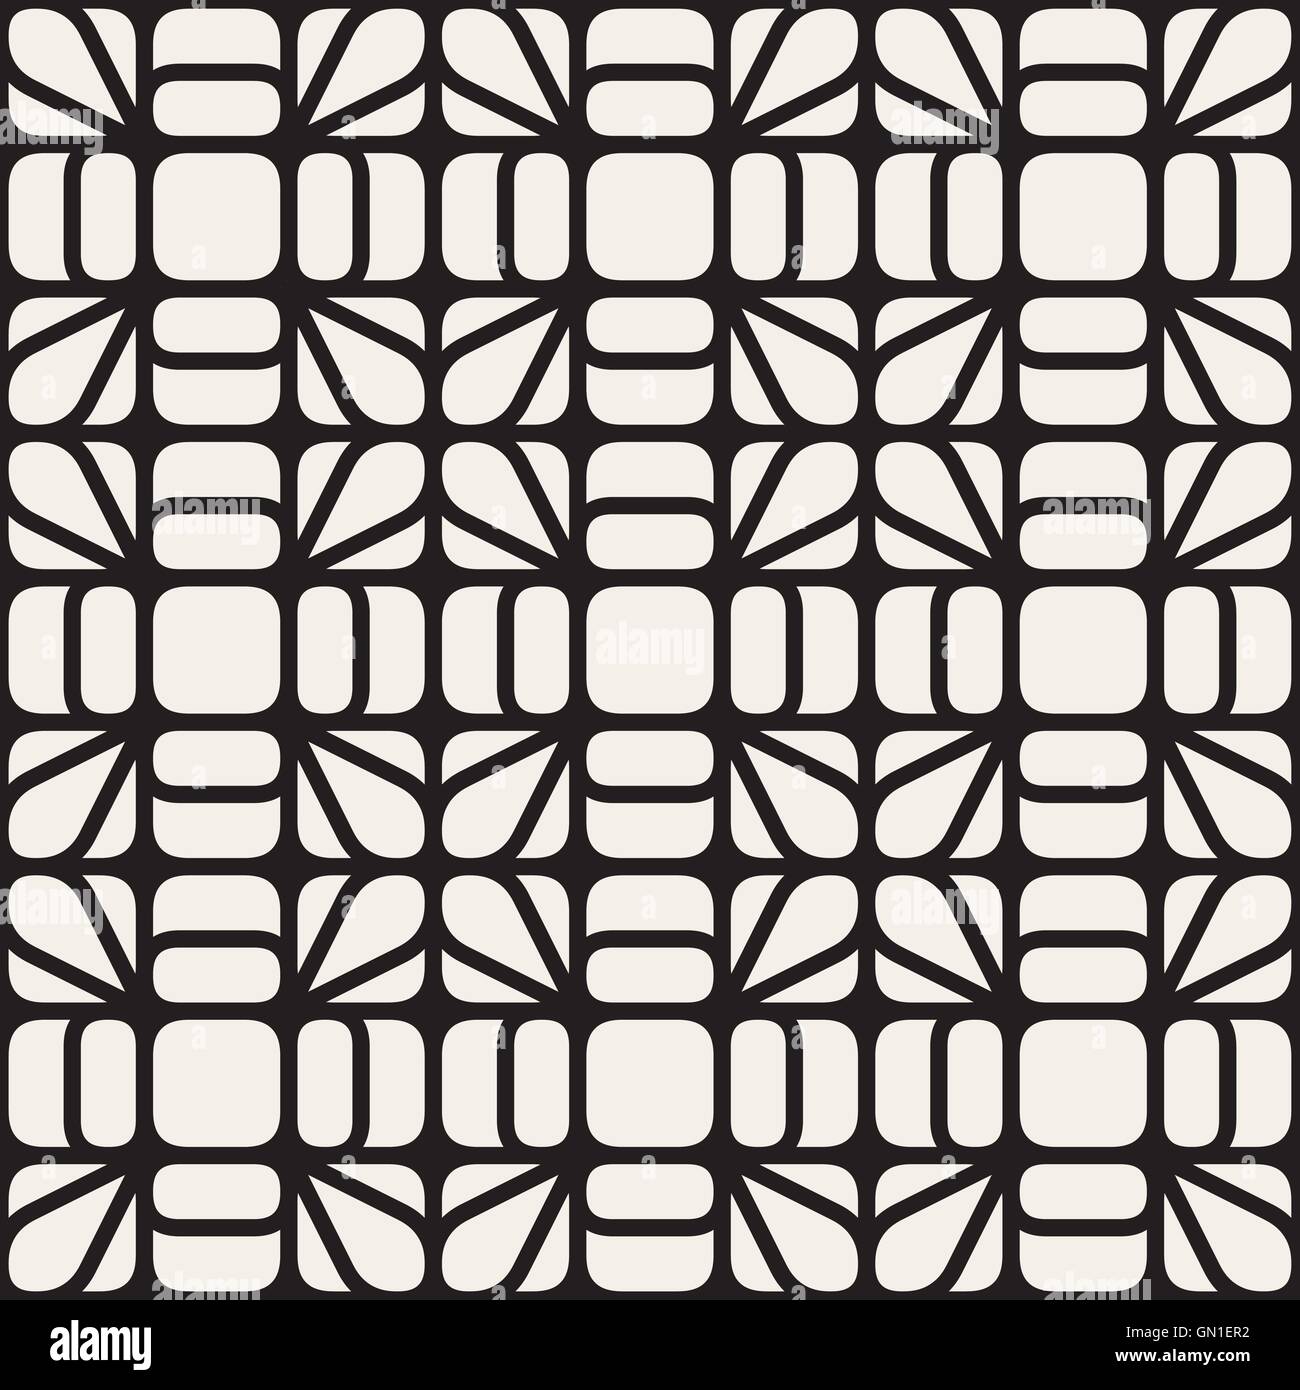 https://c8.alamy.com/comp/GN1ER2/vector-seamless-black-and-white-rounded-line-geometric-lace-pattern-GN1ER2.jpg